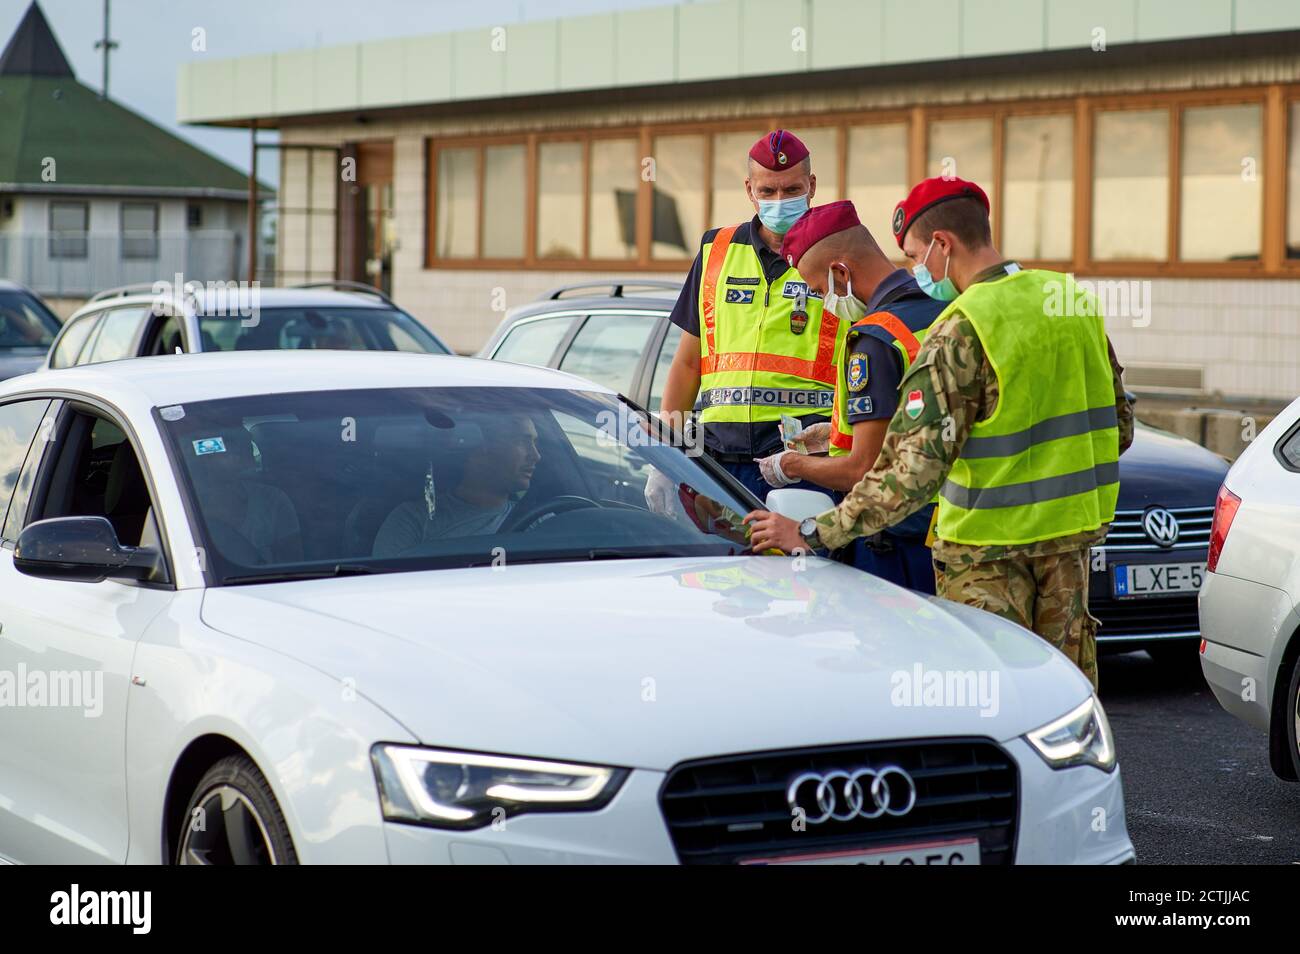 Hegyeshalom, Hungary, 23rd September 2020. Policemen control travelers at the border Austria Hungary, due to high corona infection rate and the Supercup match FC Bayern Munich - FC Sevilla the next day © Peter Schatz / Alamy Live News Stock Photo